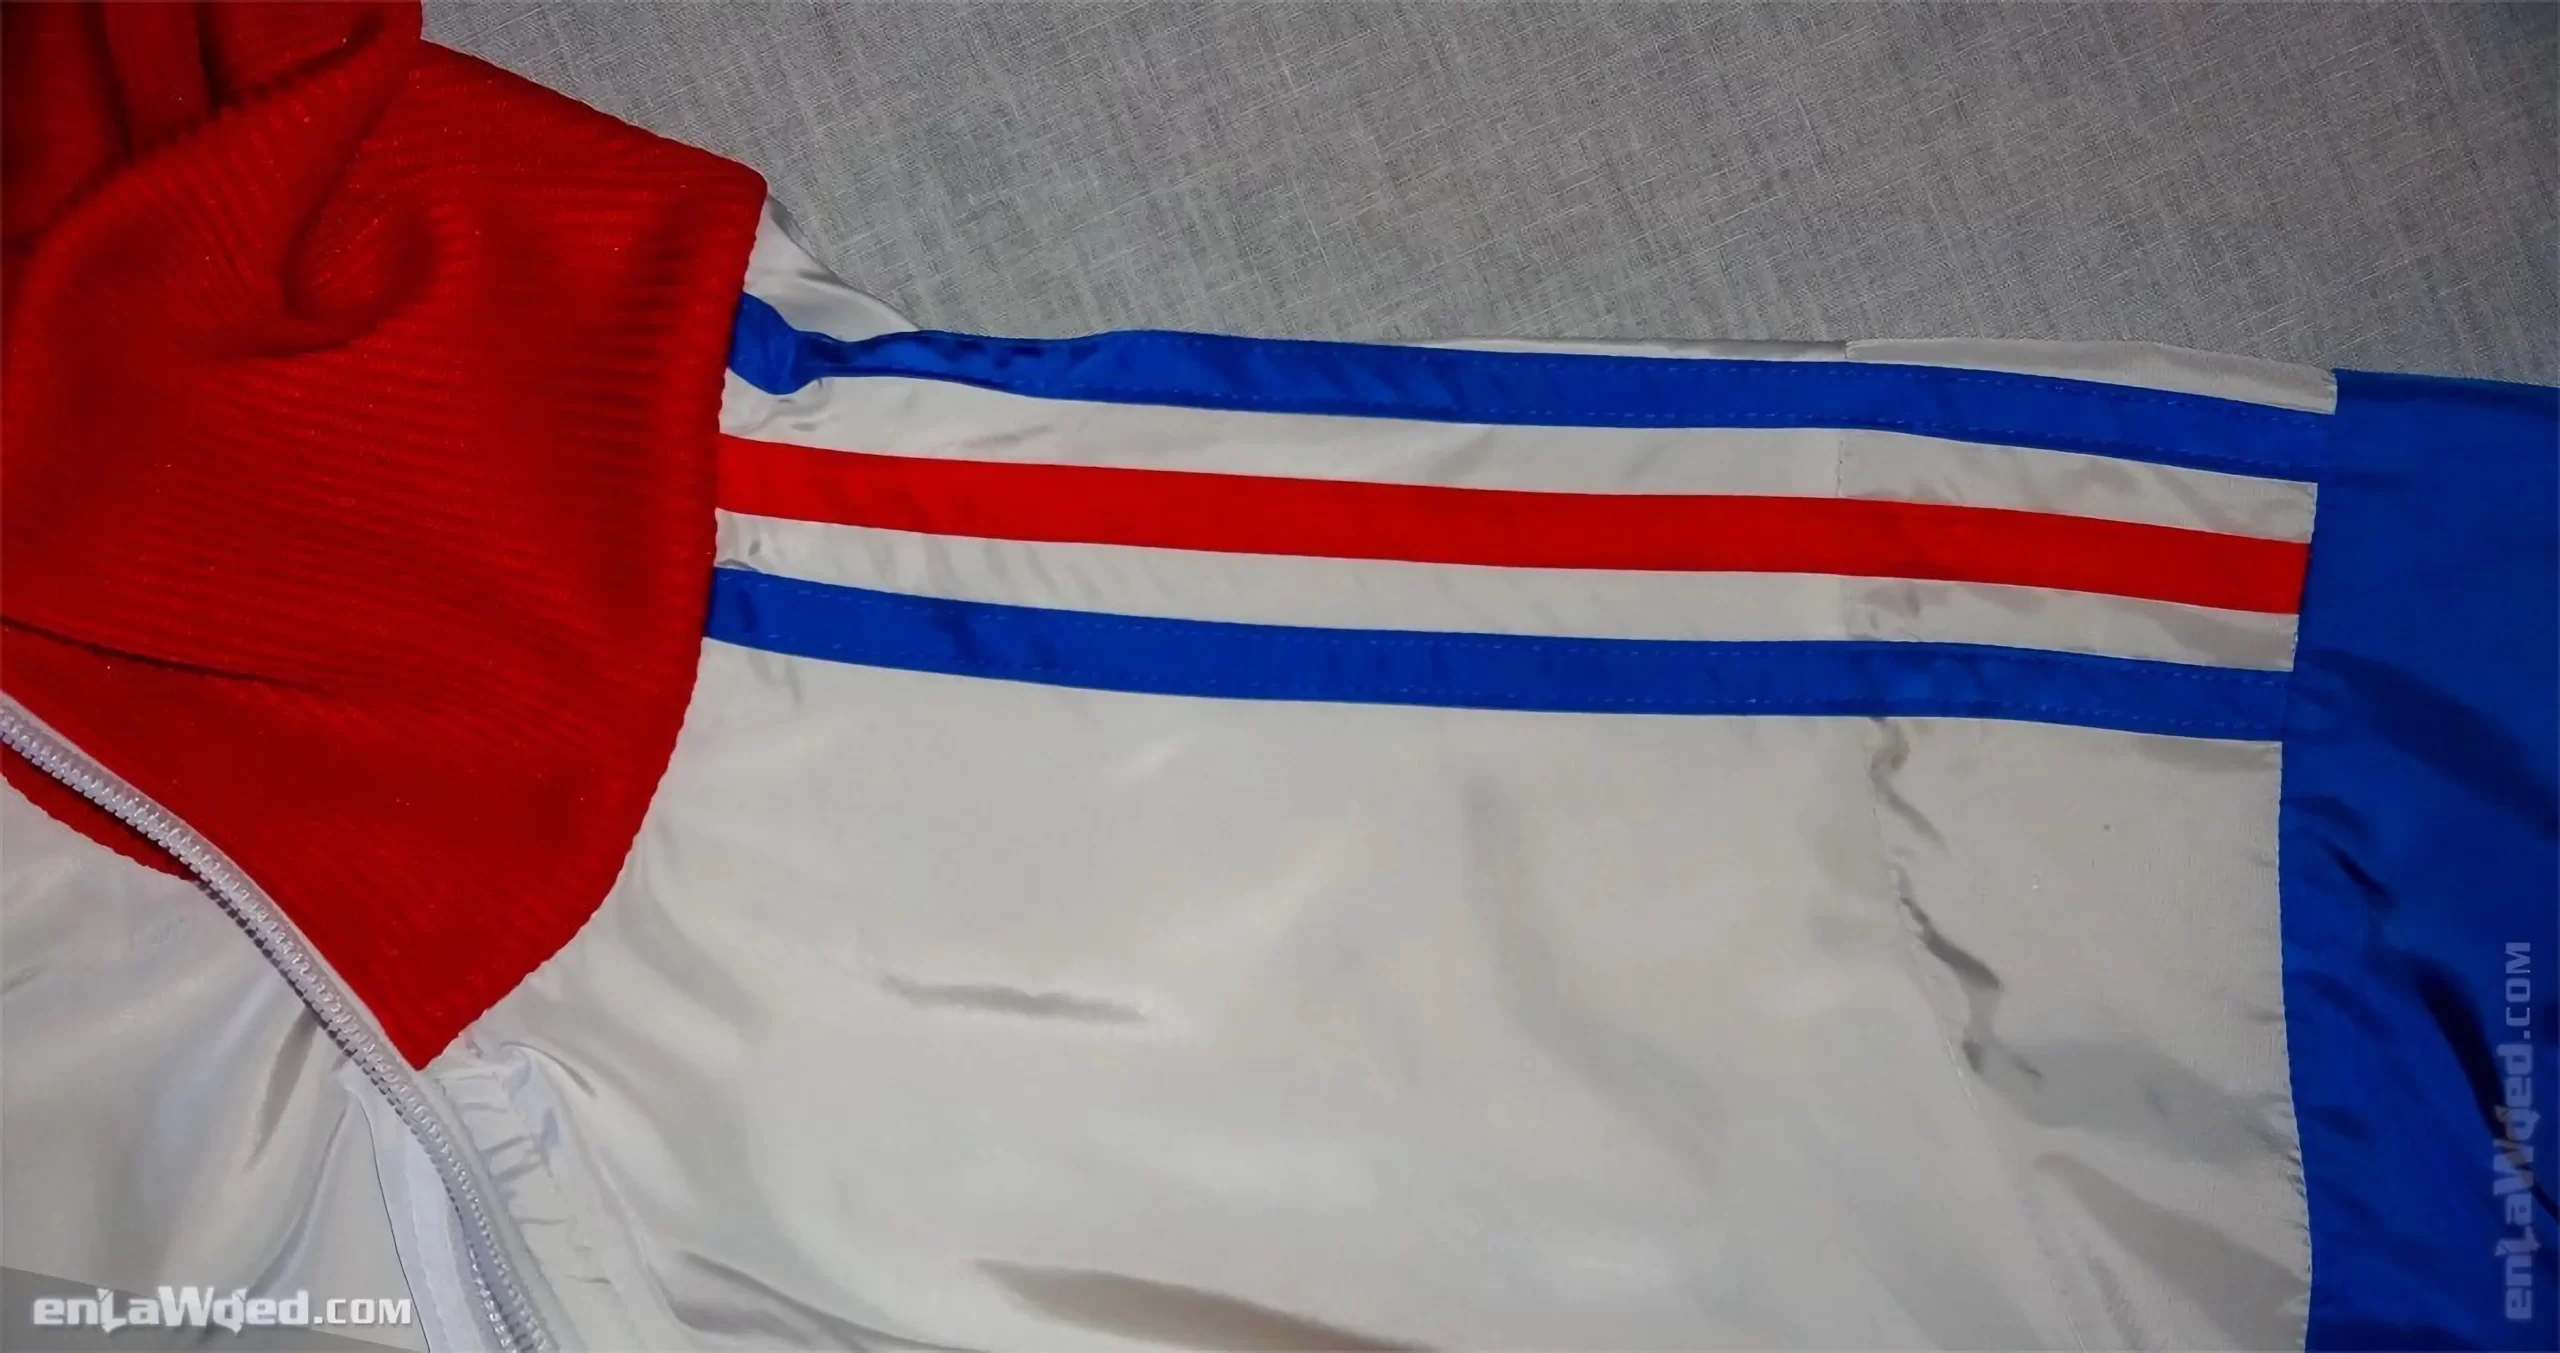 Men’s 2005 Great Britain Olympic ’84 TT by Adidas: Supported (EnLawded.com file #lmcemc4e2uggfakki6y)